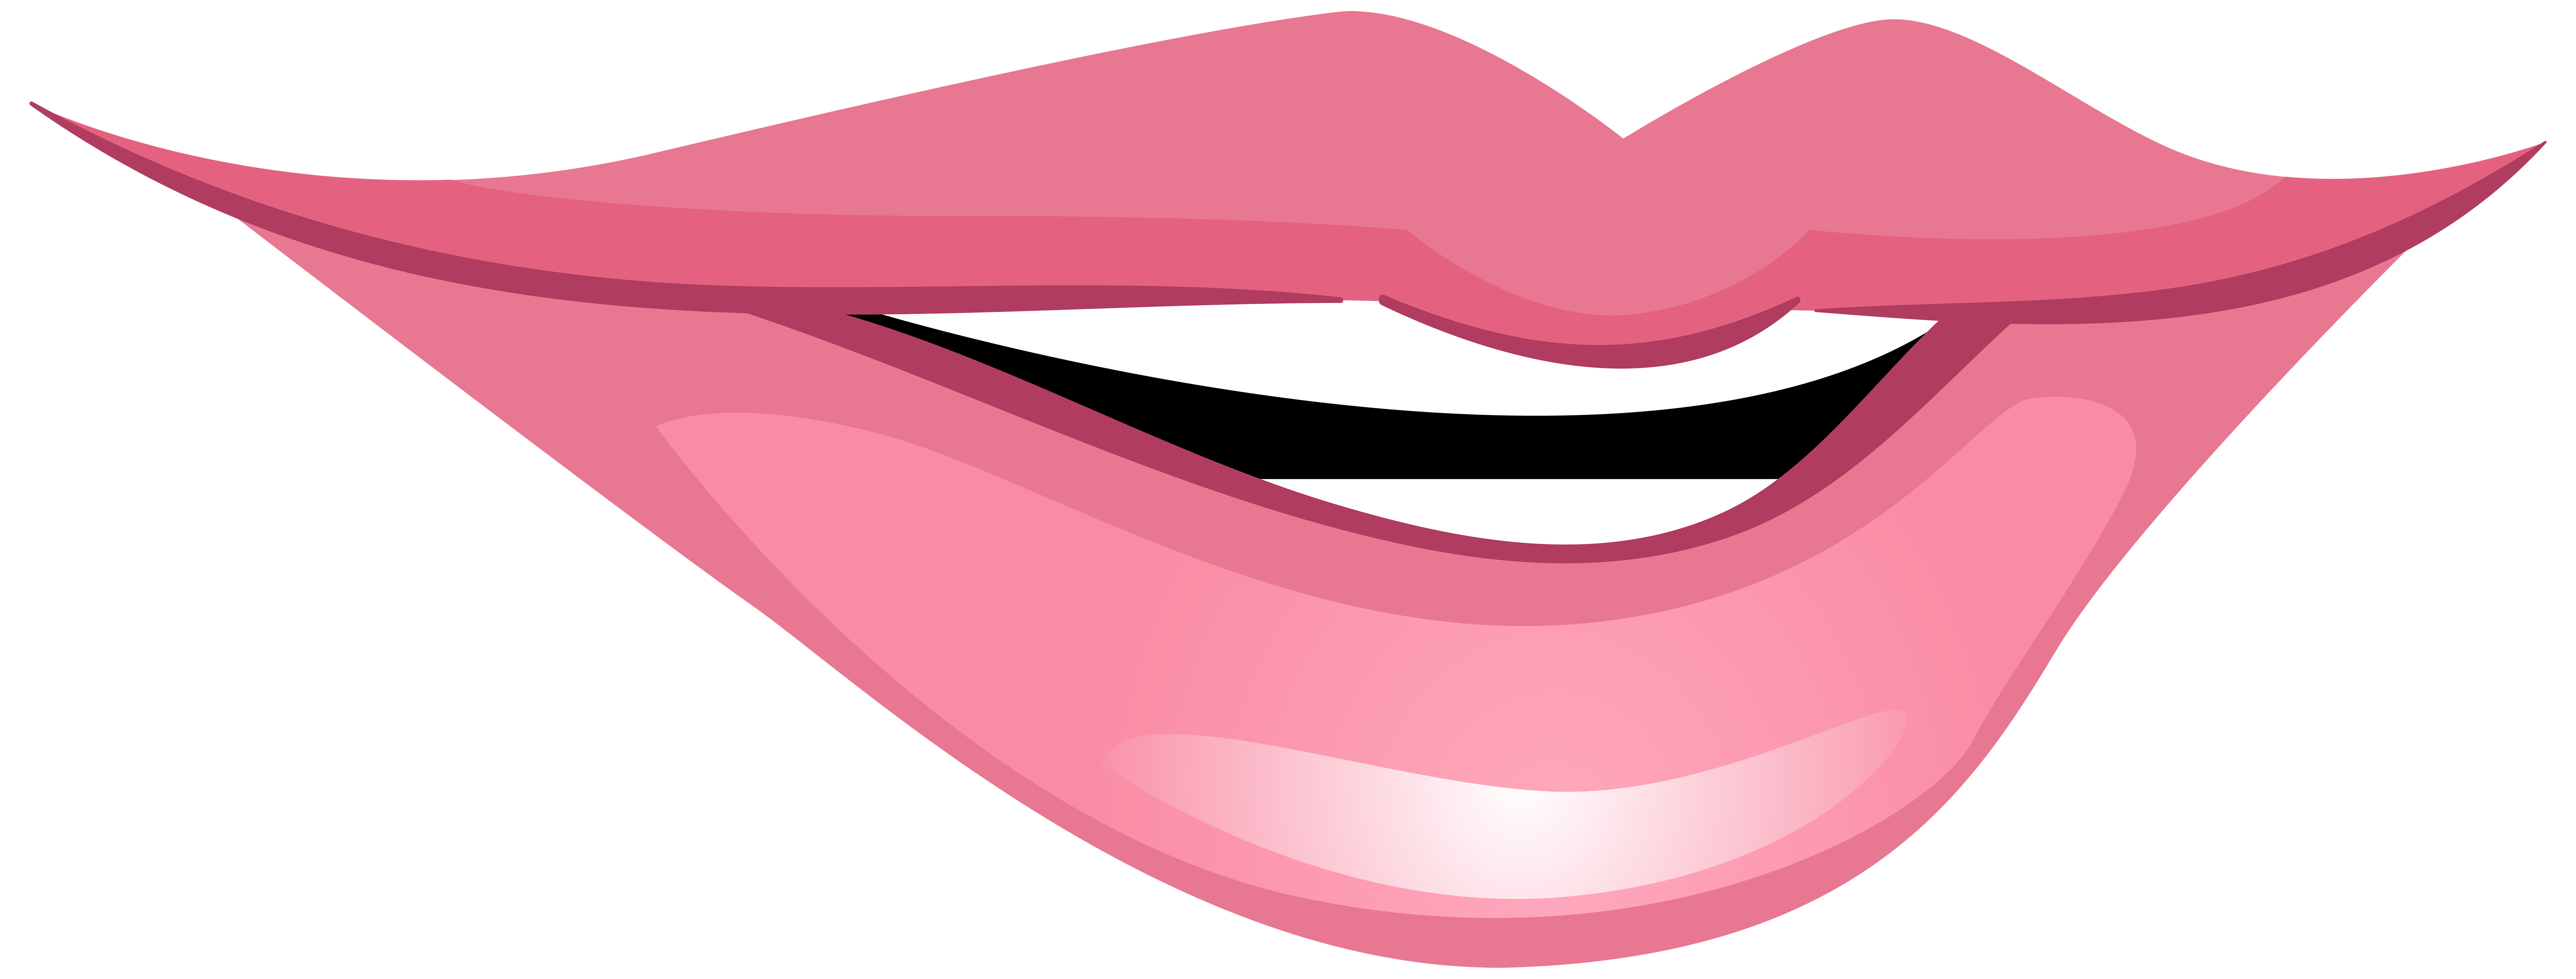 Smiling mouth clipart.